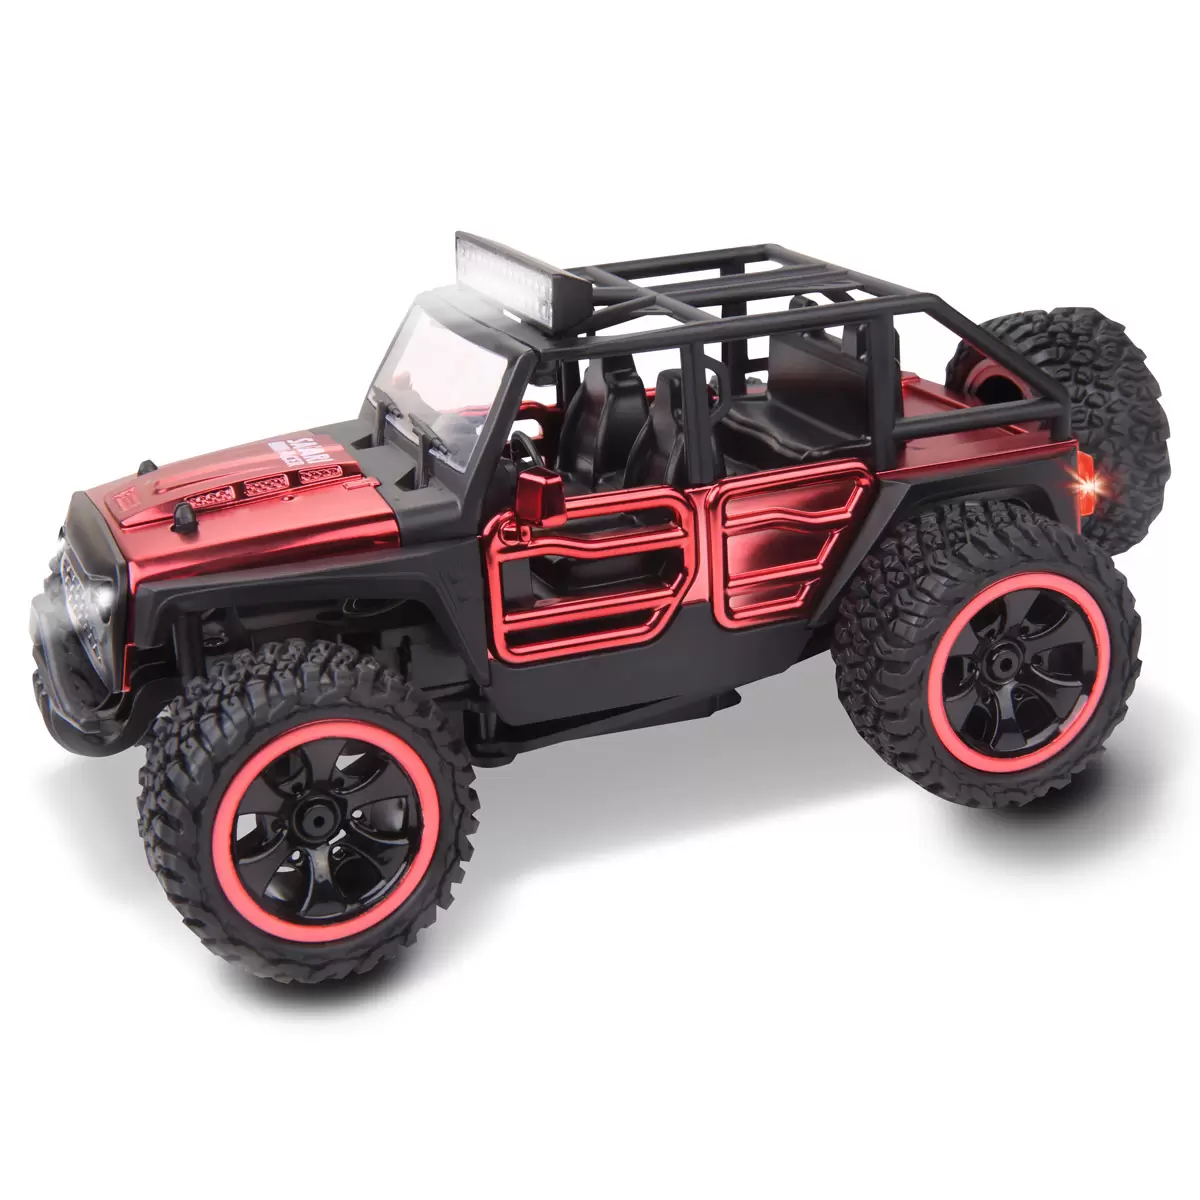 Buy Power Craze High Speed RC Red Side Image at Costco.co.uk